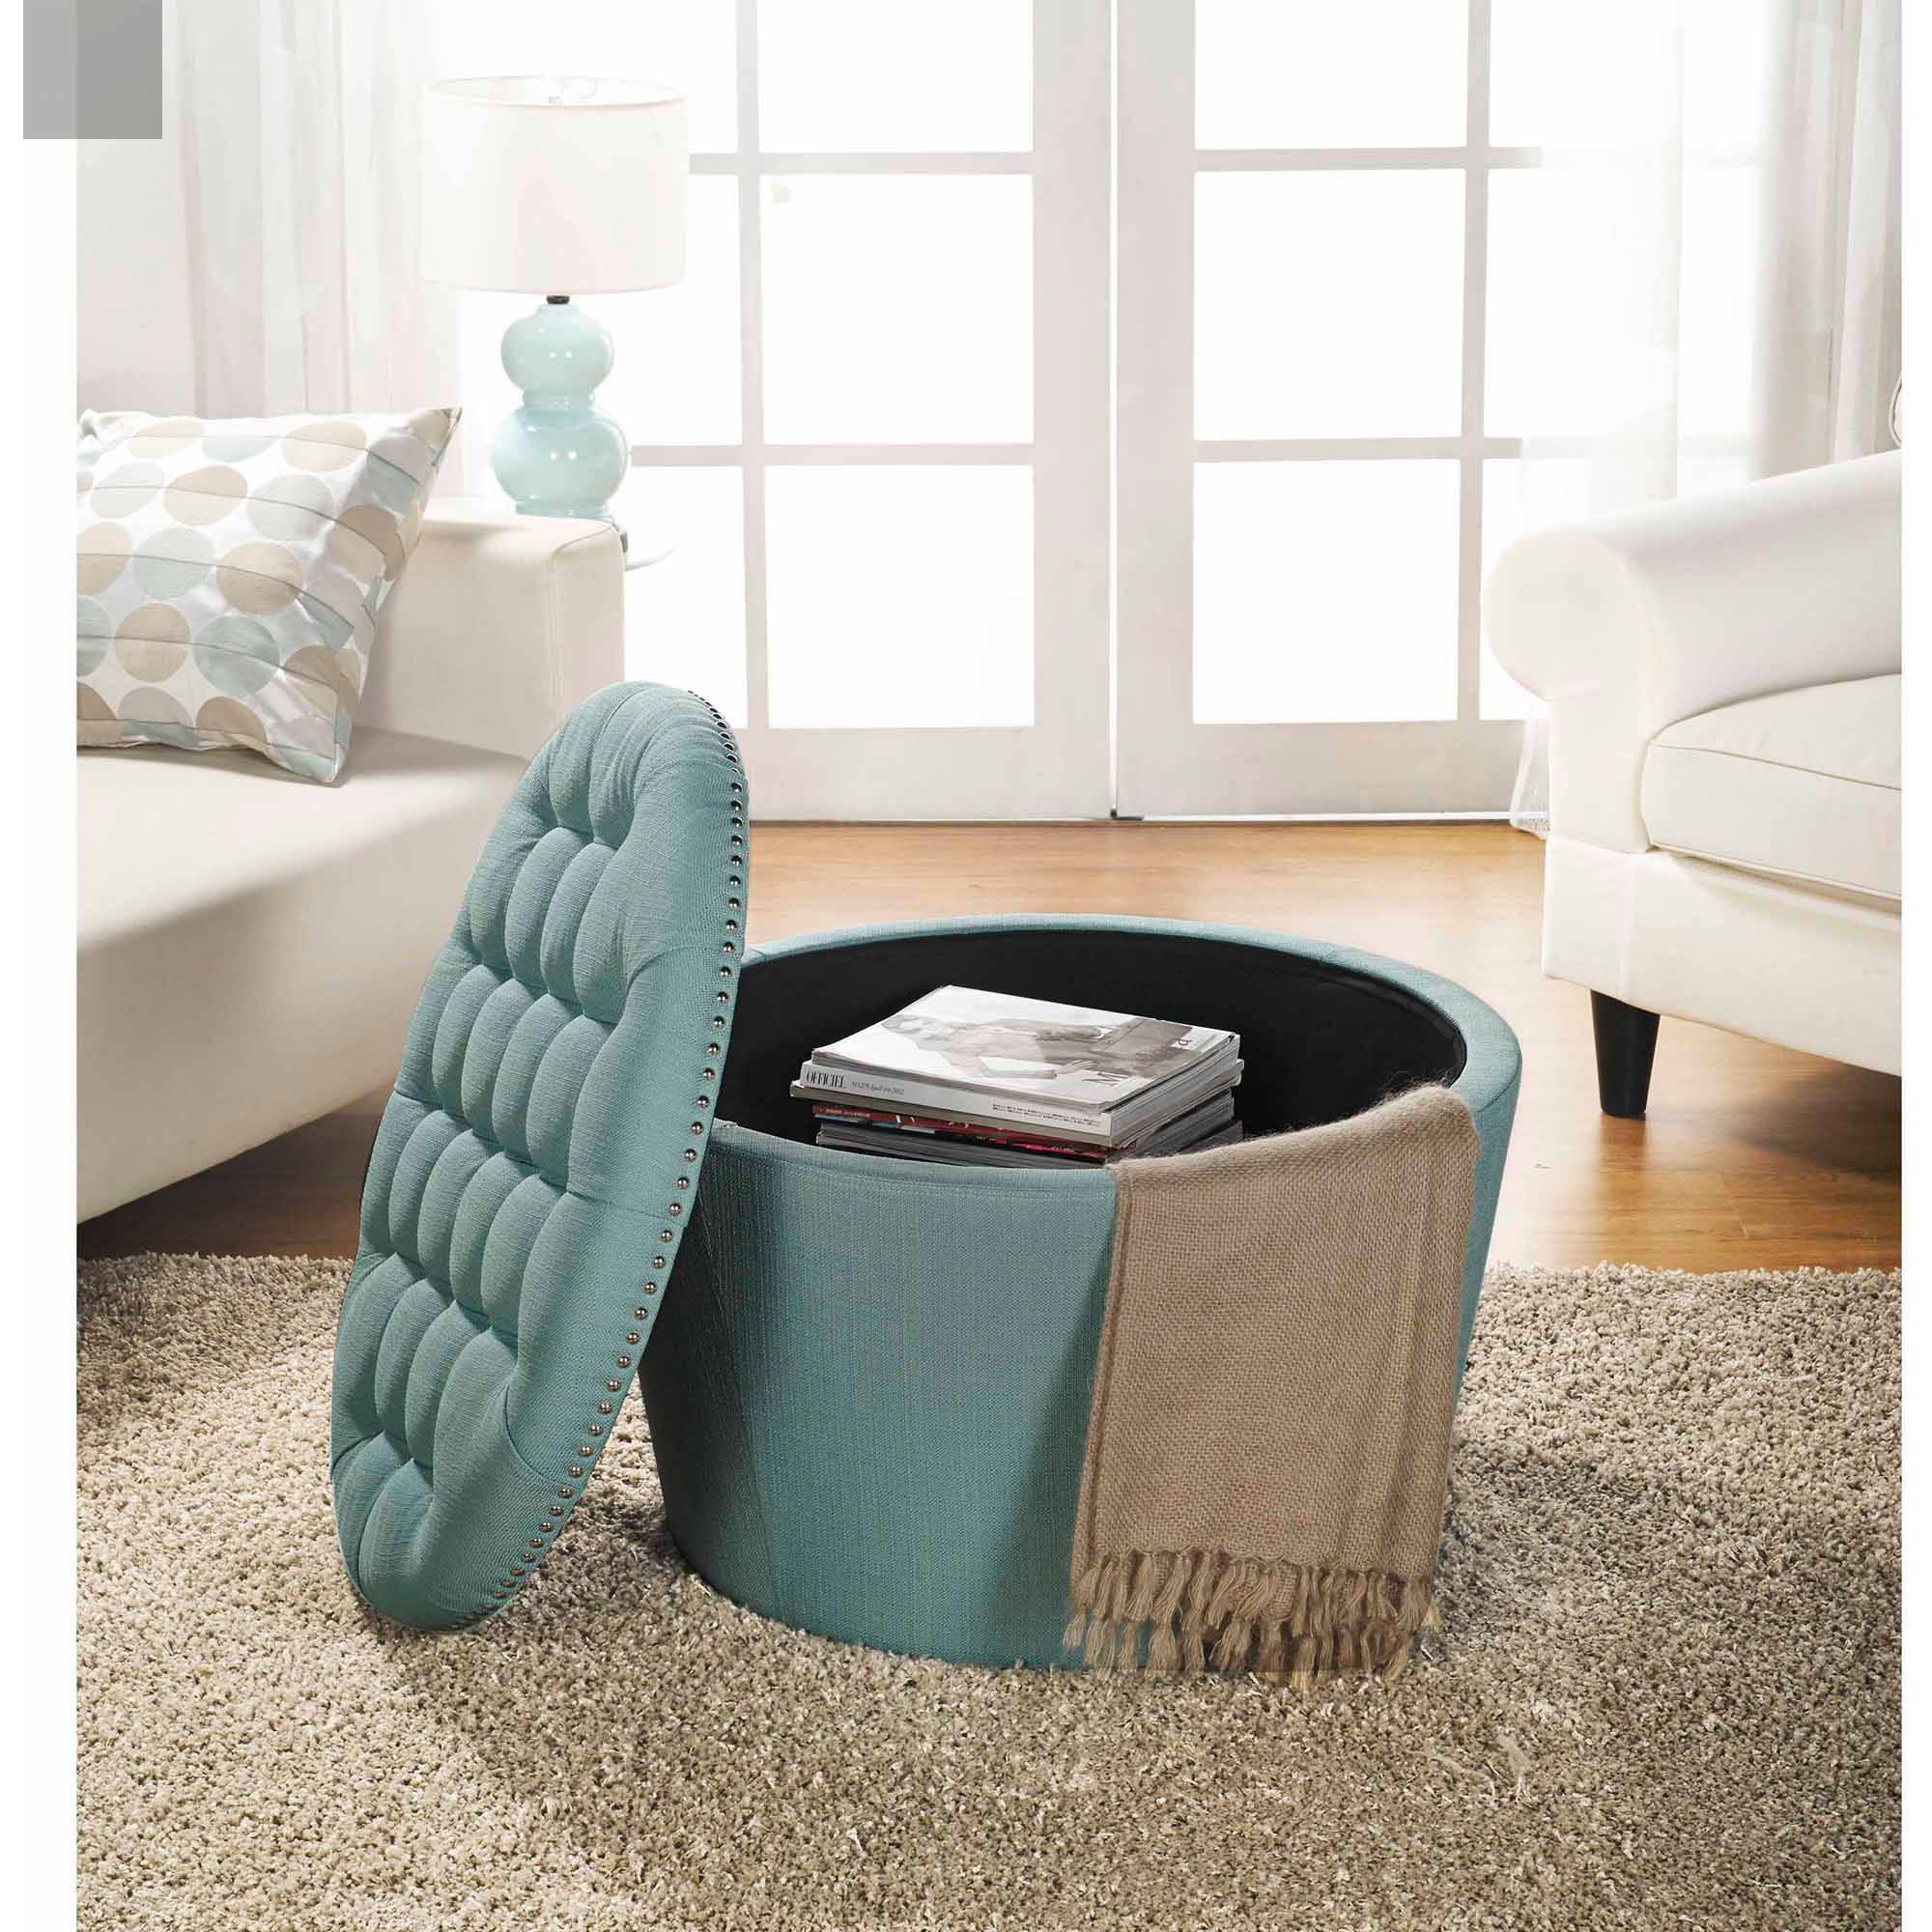 Better Homes & Gardens Round Tufted Storage Ottoman with Nailheads, Teal - image 3 of 4